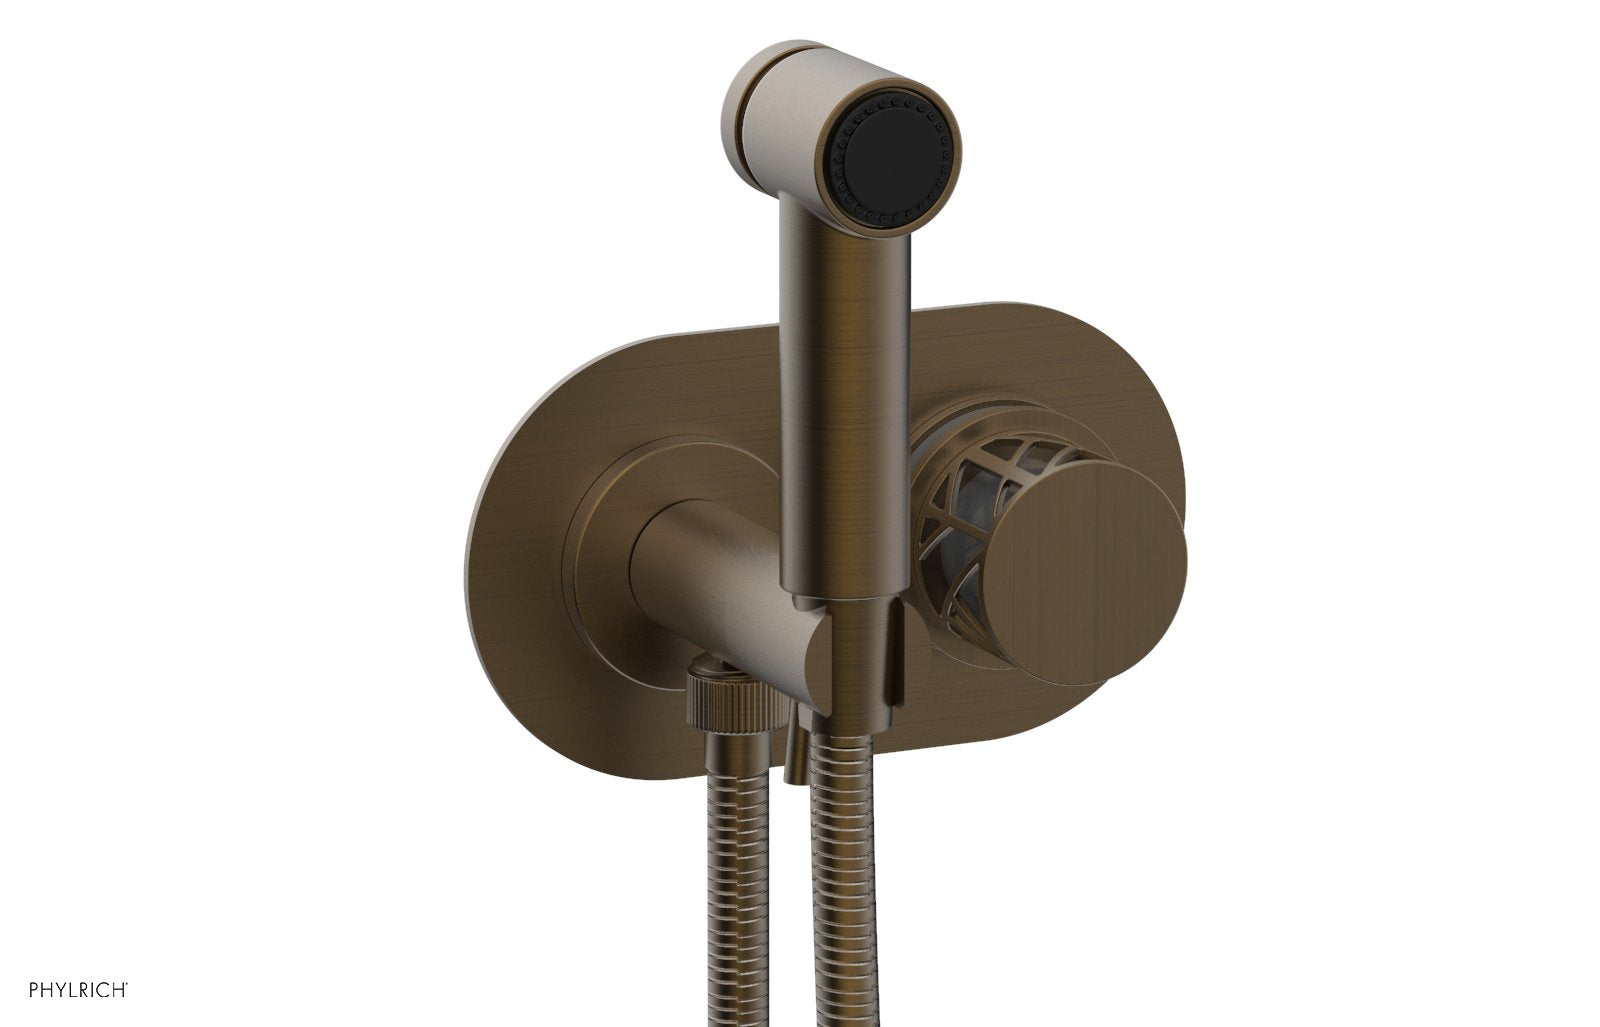 Phylrich JOLIE Wall Mounted Bidet, Round Handle with "Grey" Accents